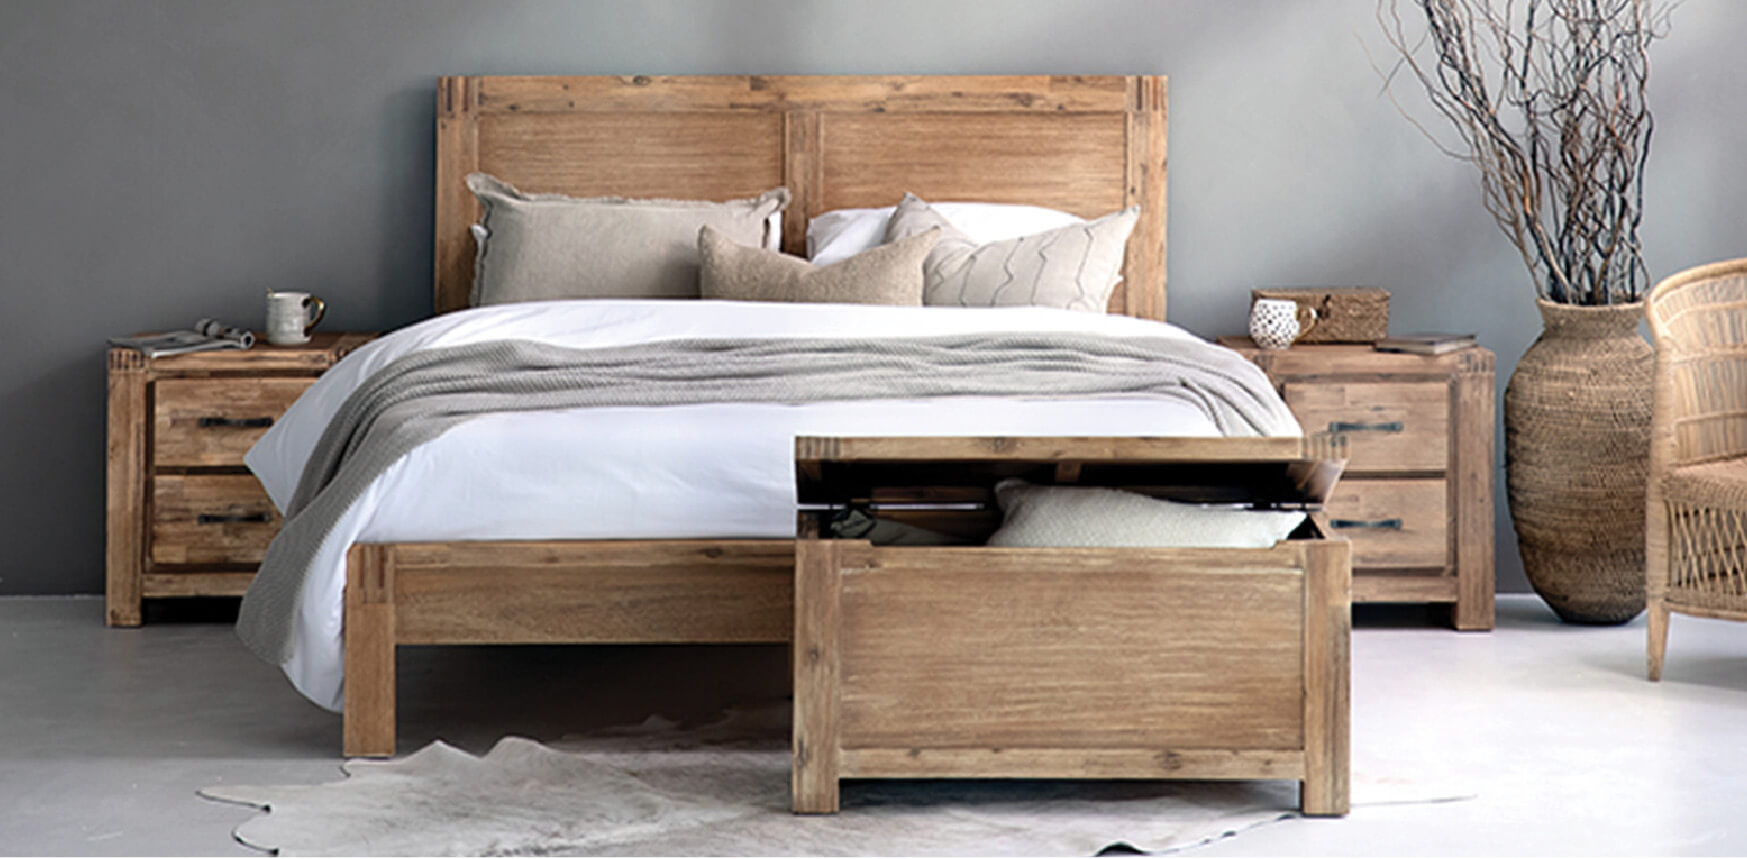 wooden headboards and bed